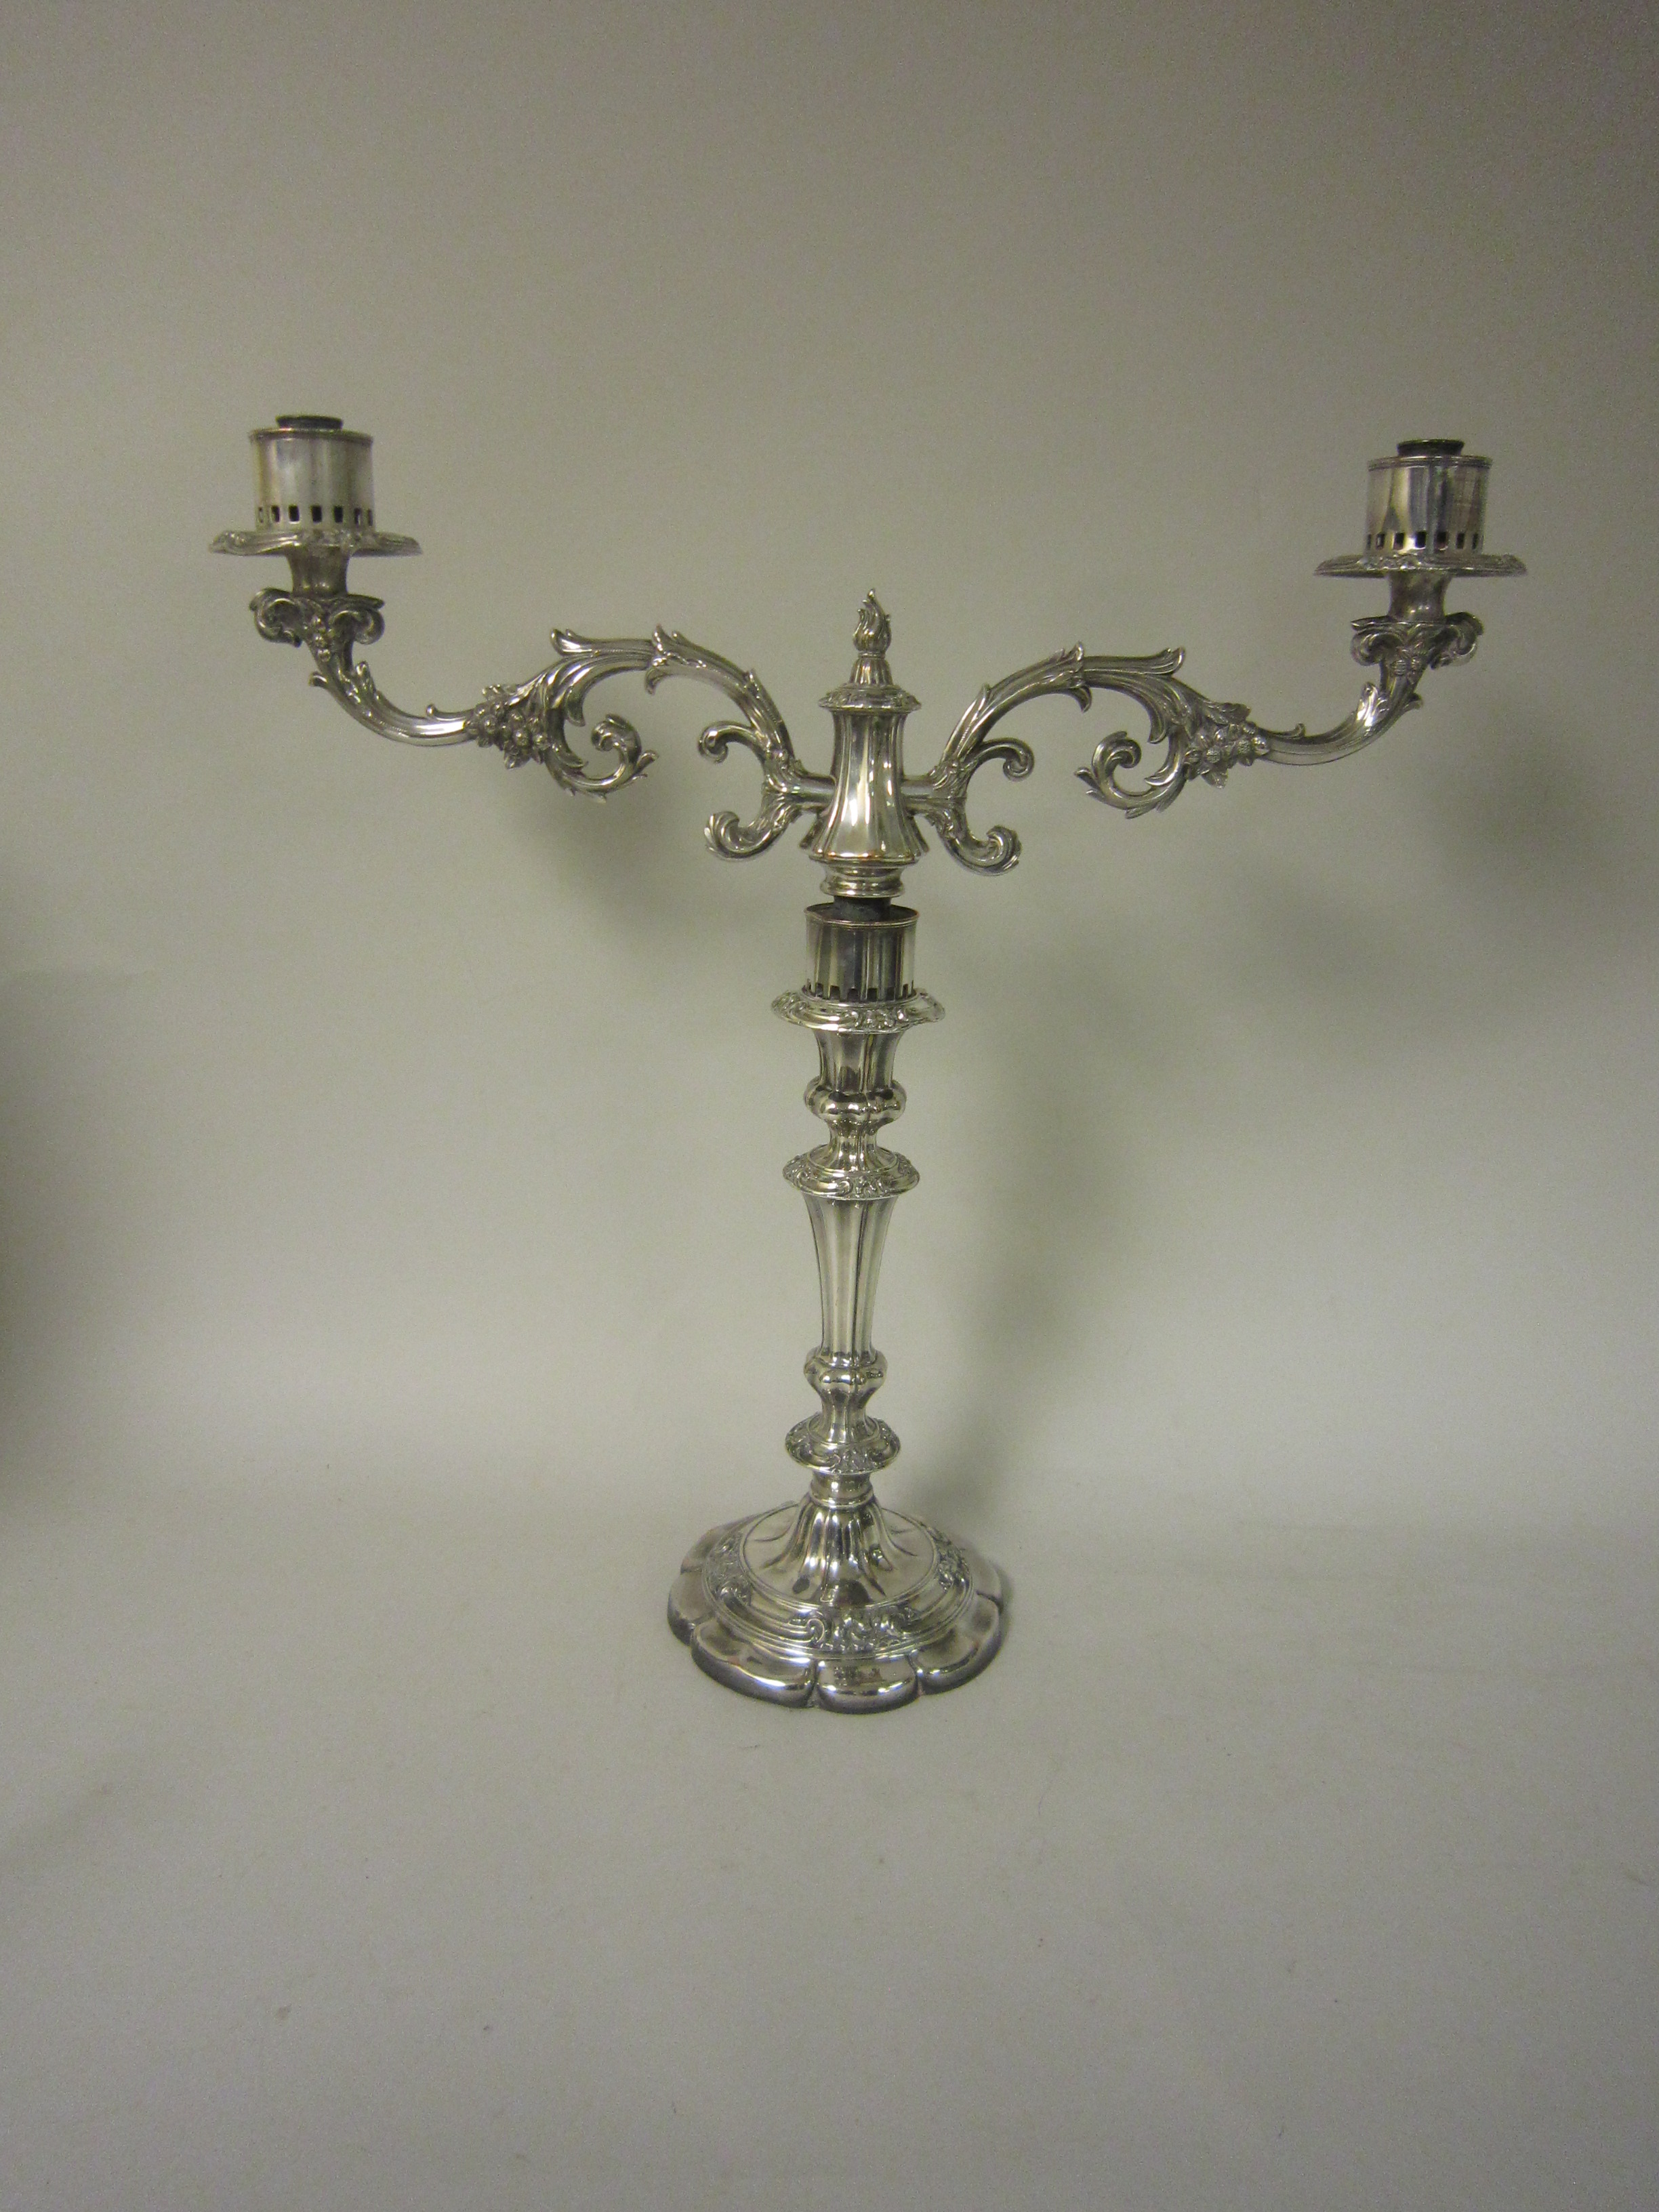 Pair of 19th Century plated Candelabra with floral and leafage scroll branches, tapering columns - Image 2 of 2